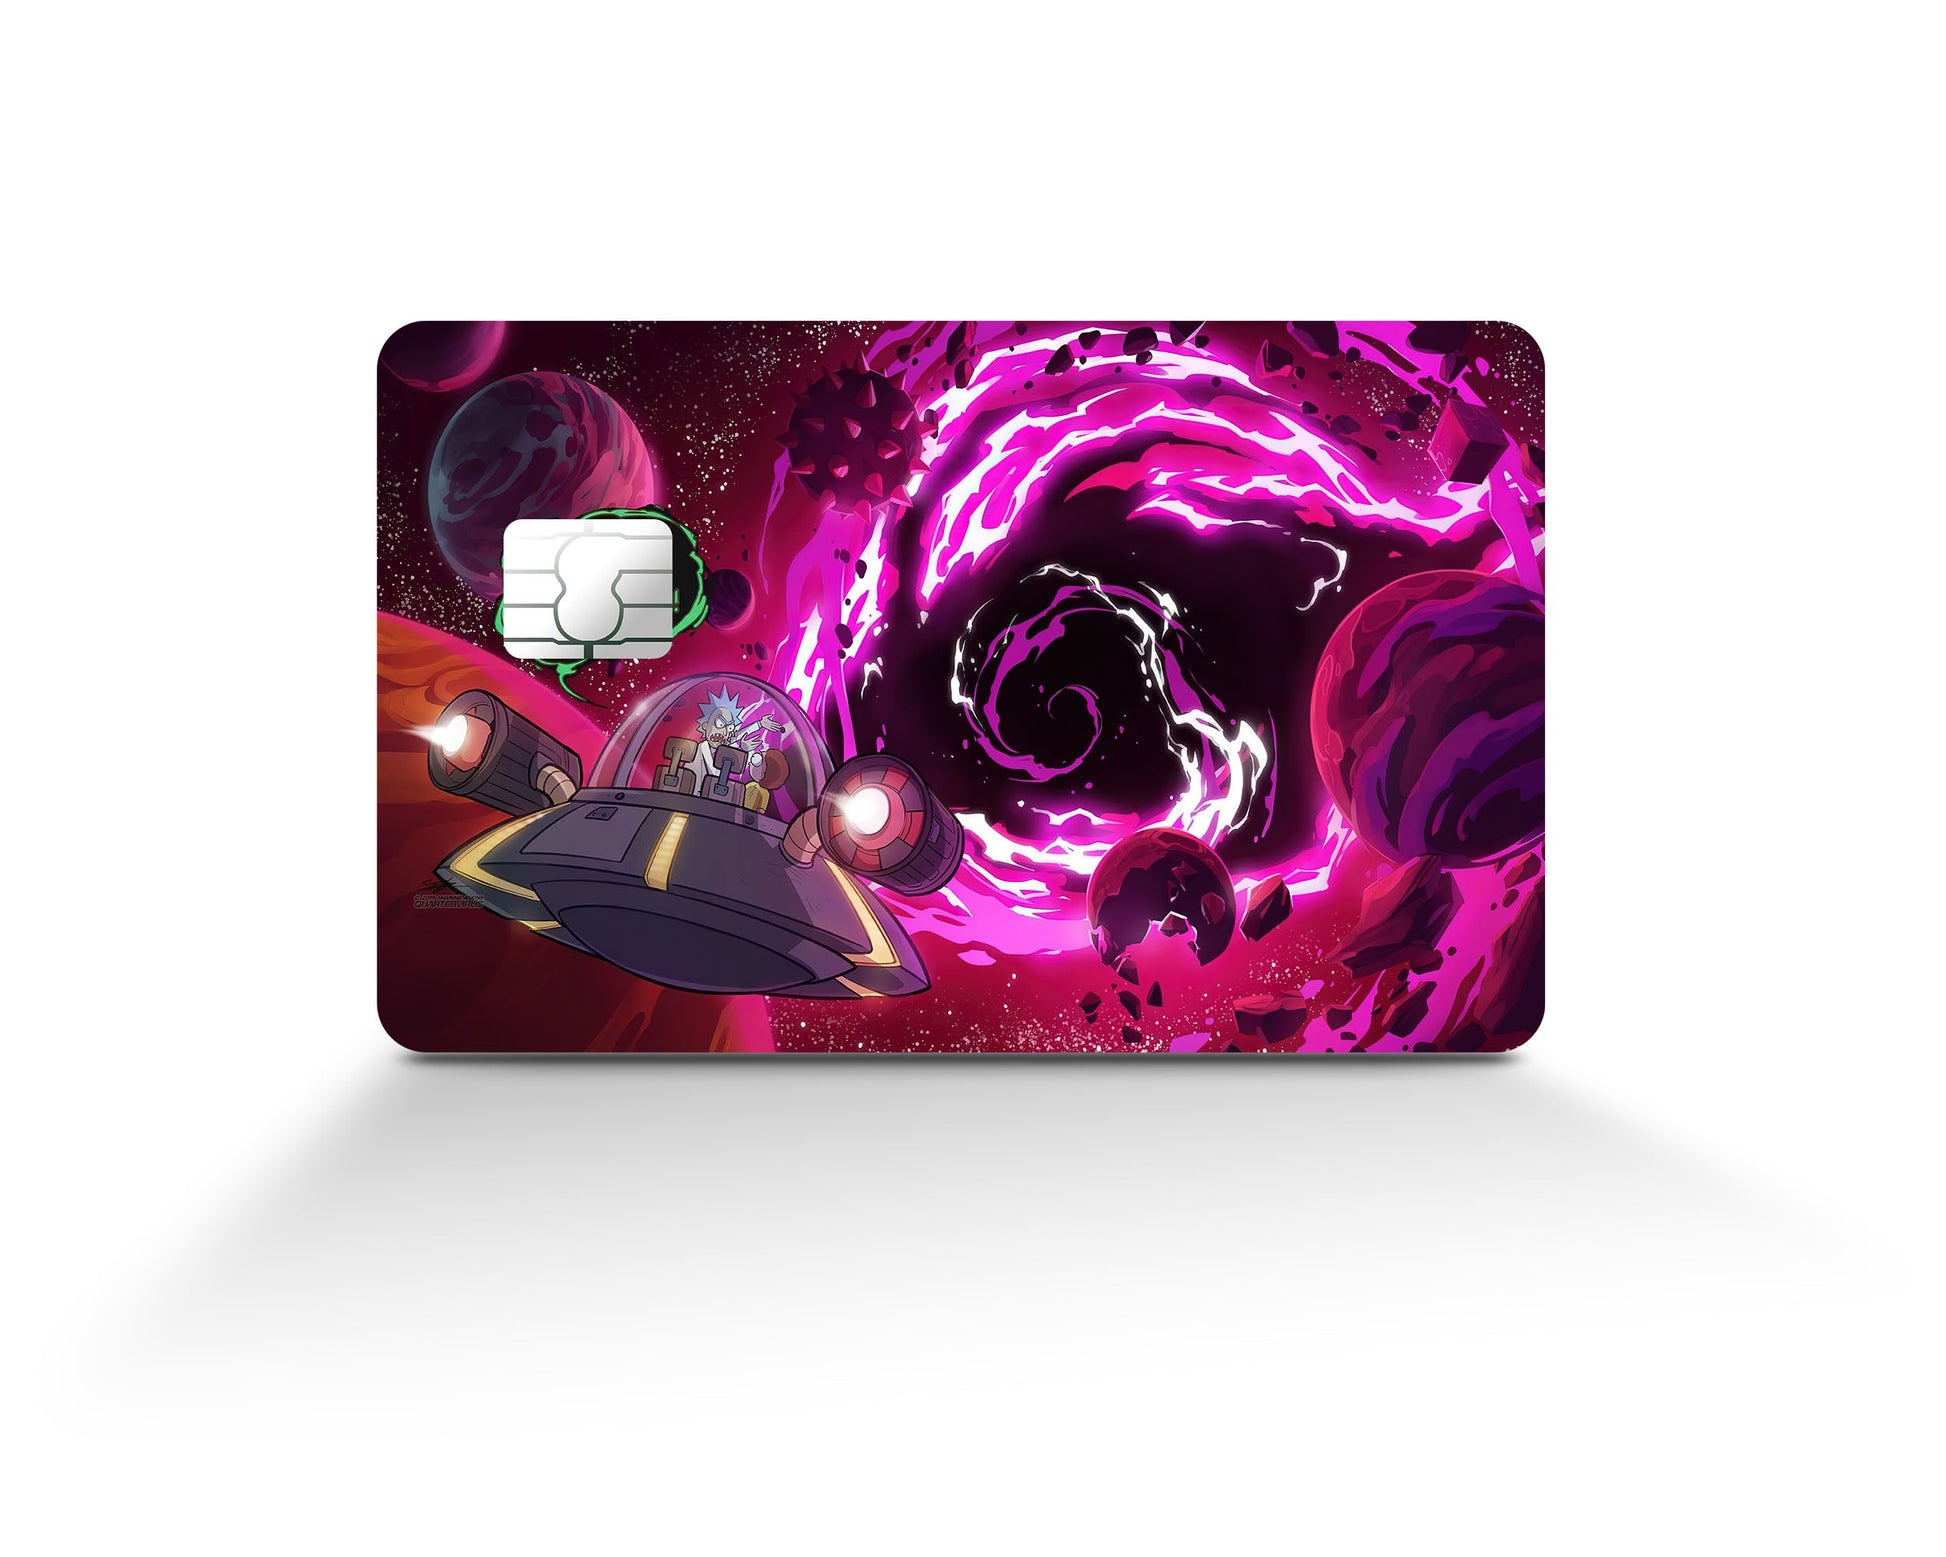 Anime Town Creations Credit Card Rick and Morty Space Travel Purple Full Skins - Anime Rick and Morty Credit Card Skin